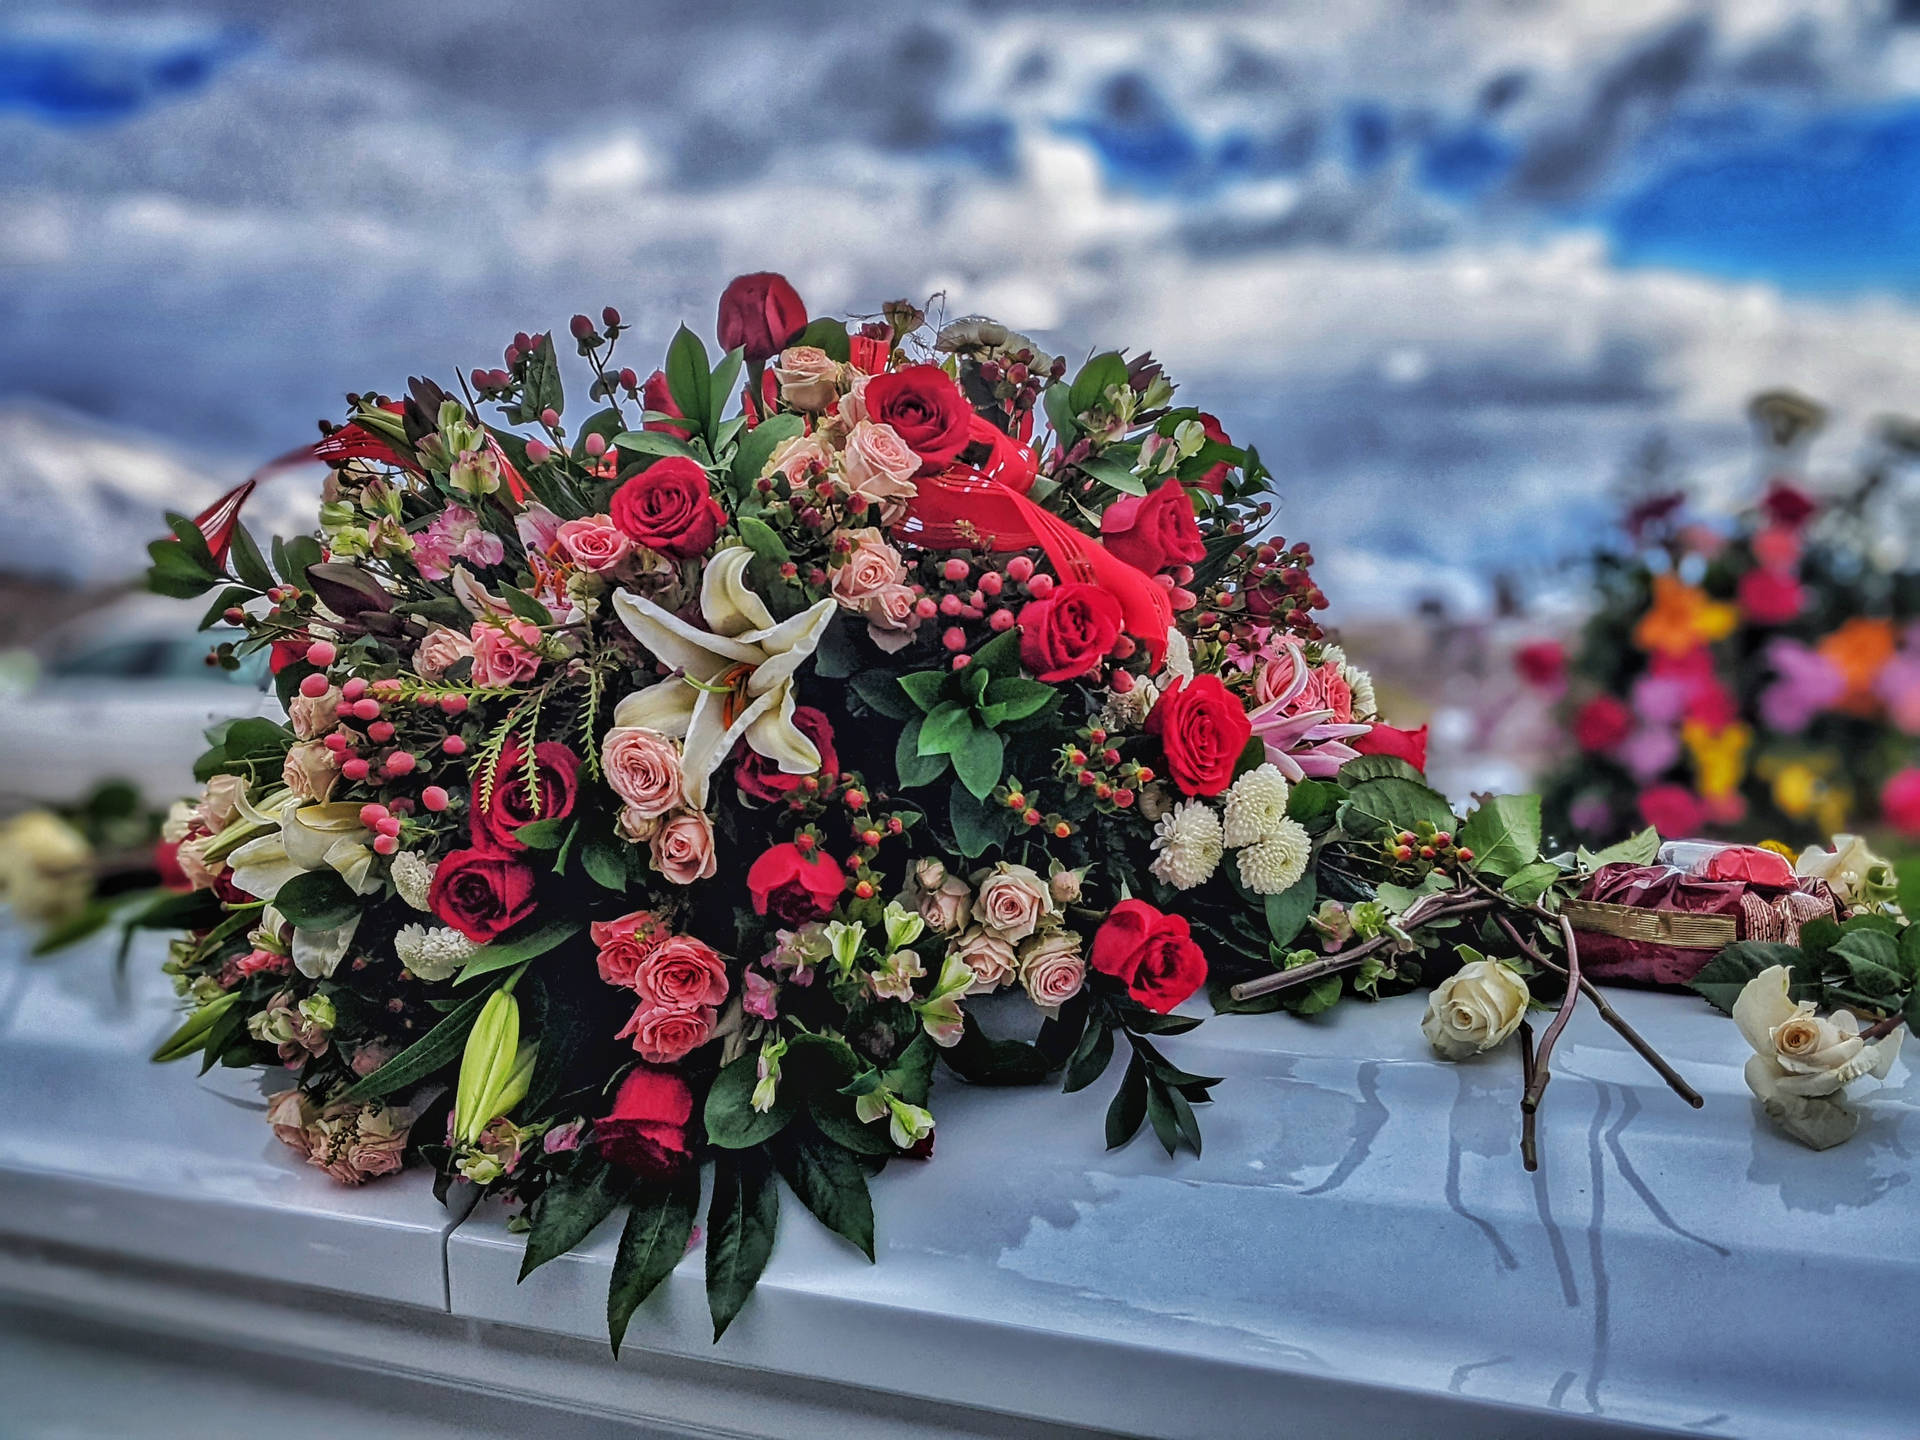 Colorful Funeral Flowers Background